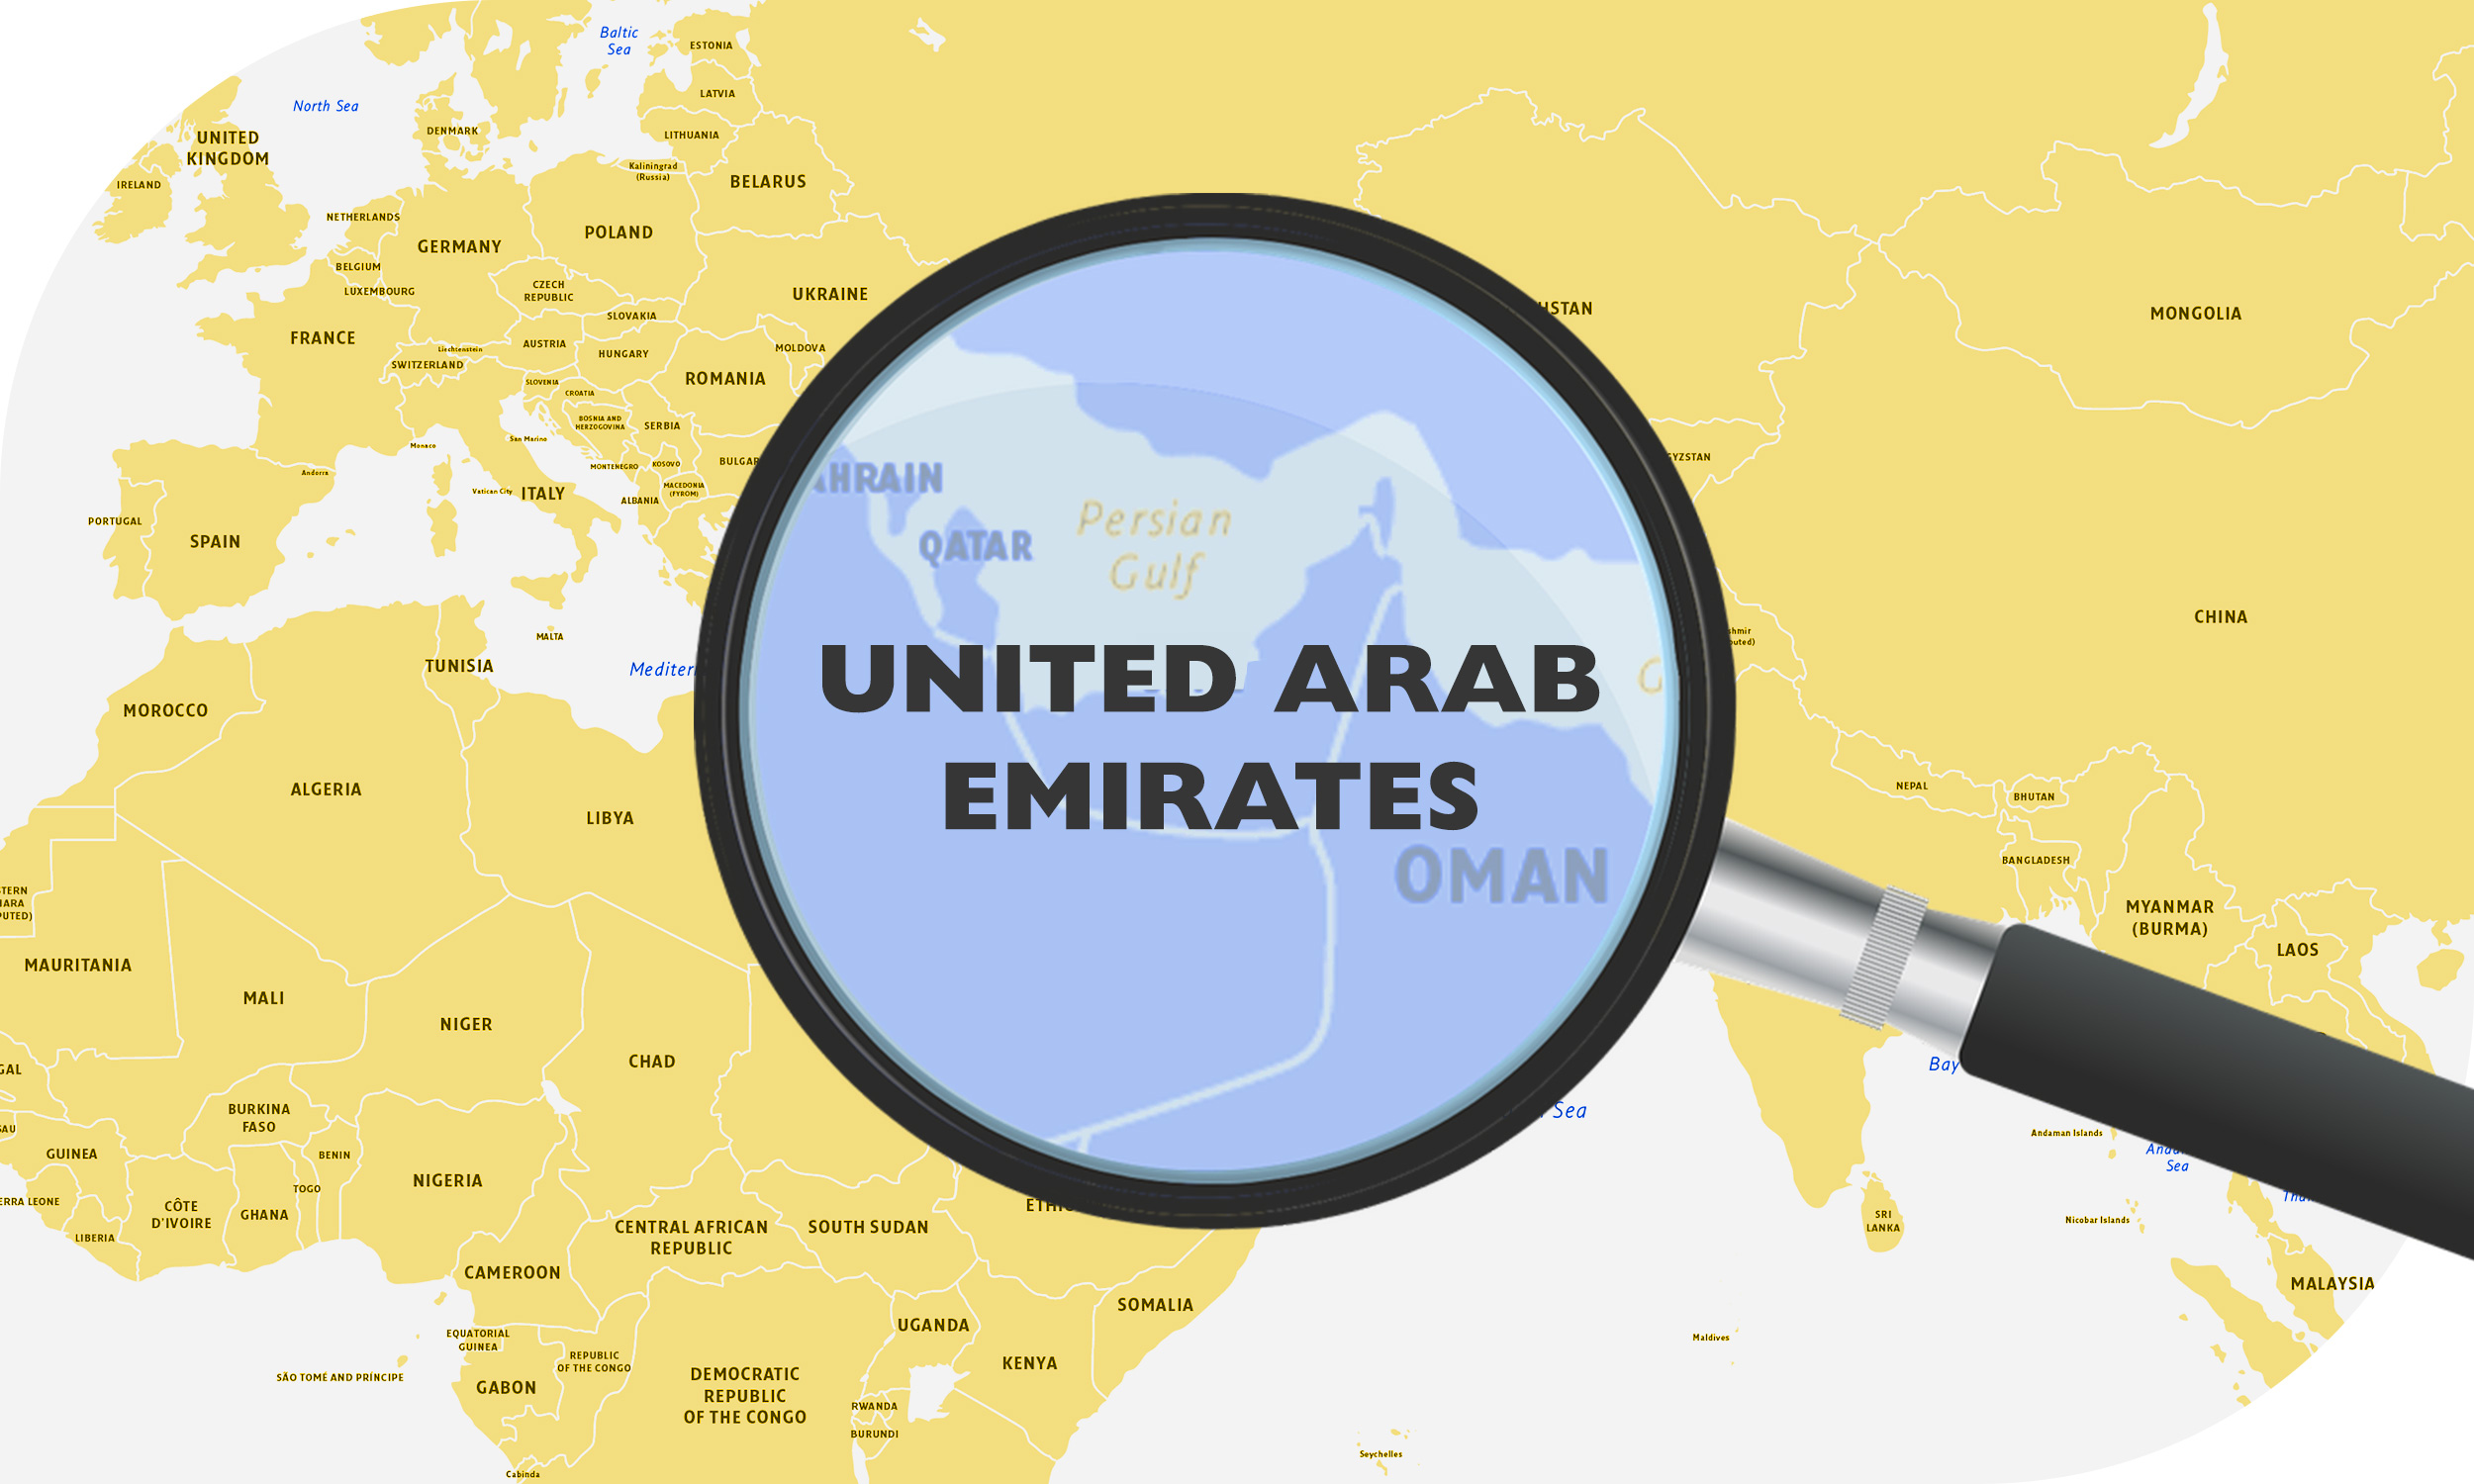 Map of Arabian peninsular showing UAE as a delivery destination